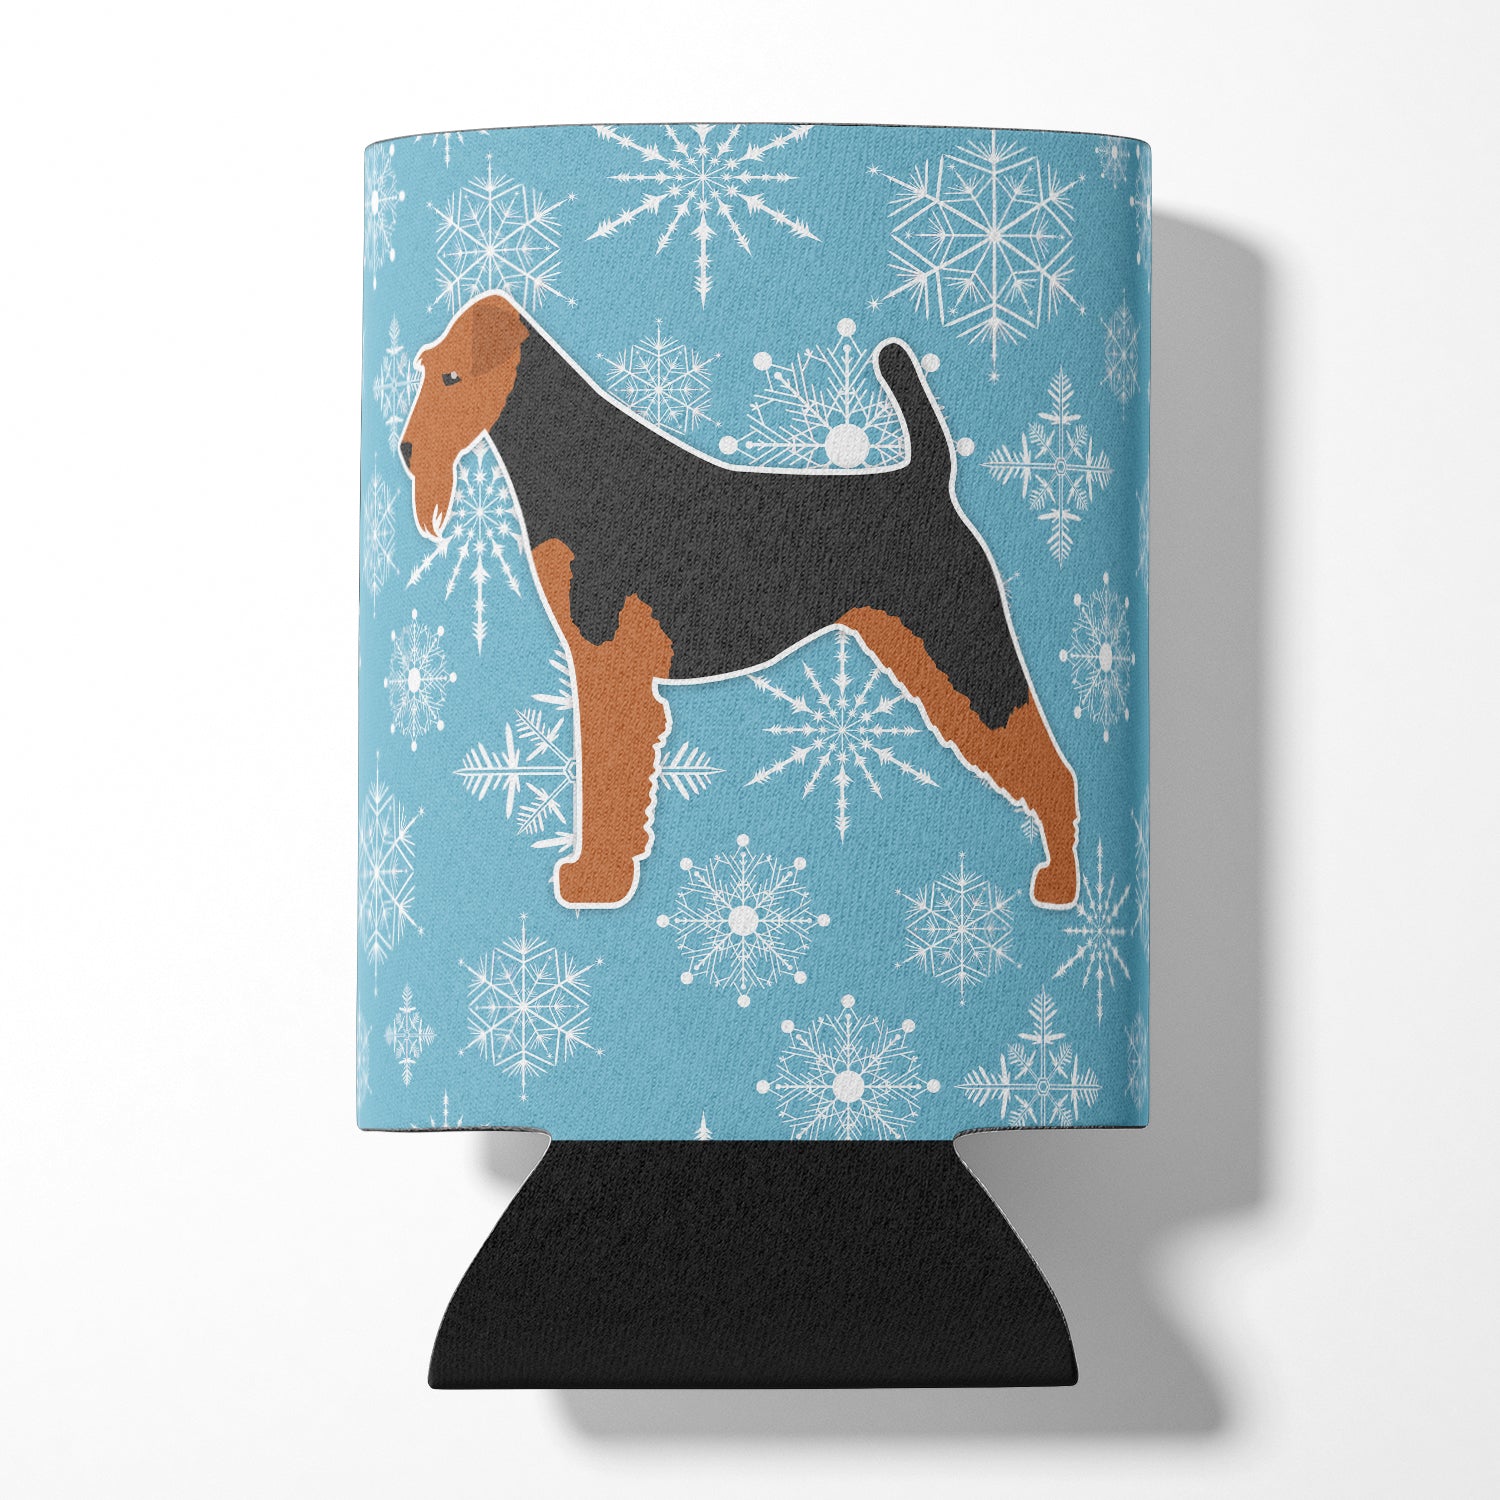 Winter Snowflake Welsh Terrier Can or Bottle Hugger BB3485CC  the-store.com.